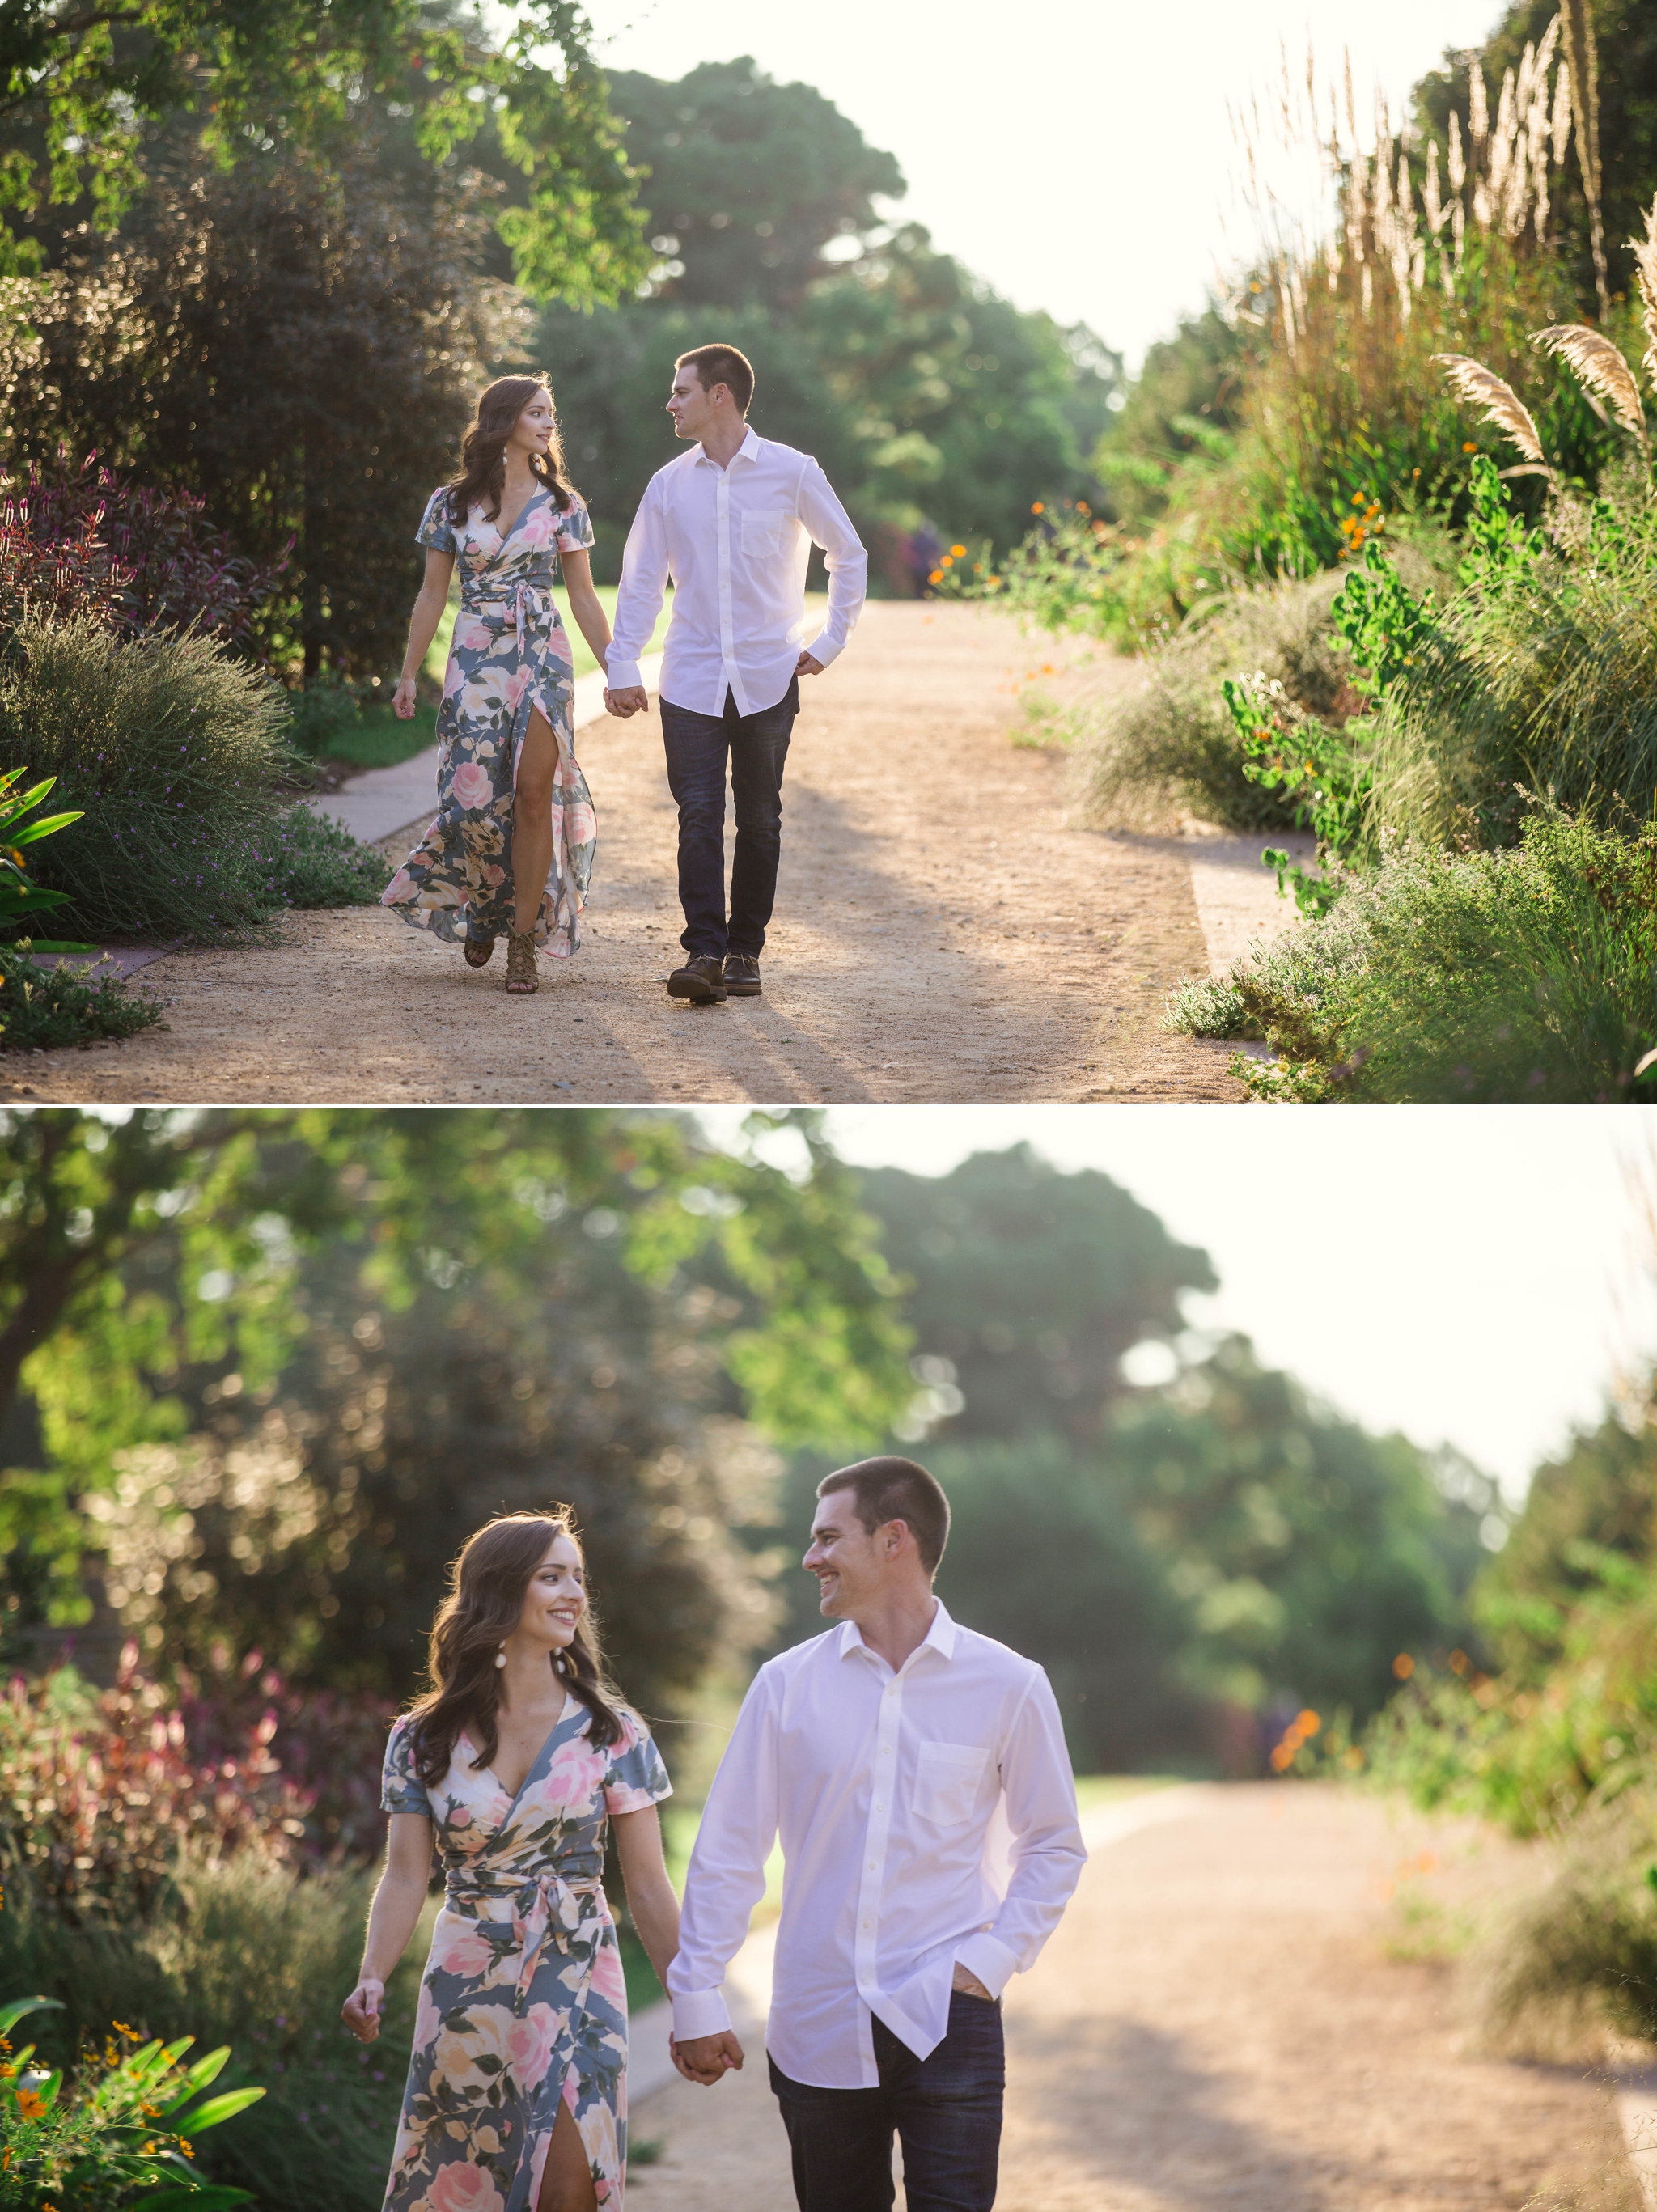 Paige + Tyler - Engagement Photography Session at the JC Raulston Arboretum - Raleigh Wedding Photographer 2.jpg